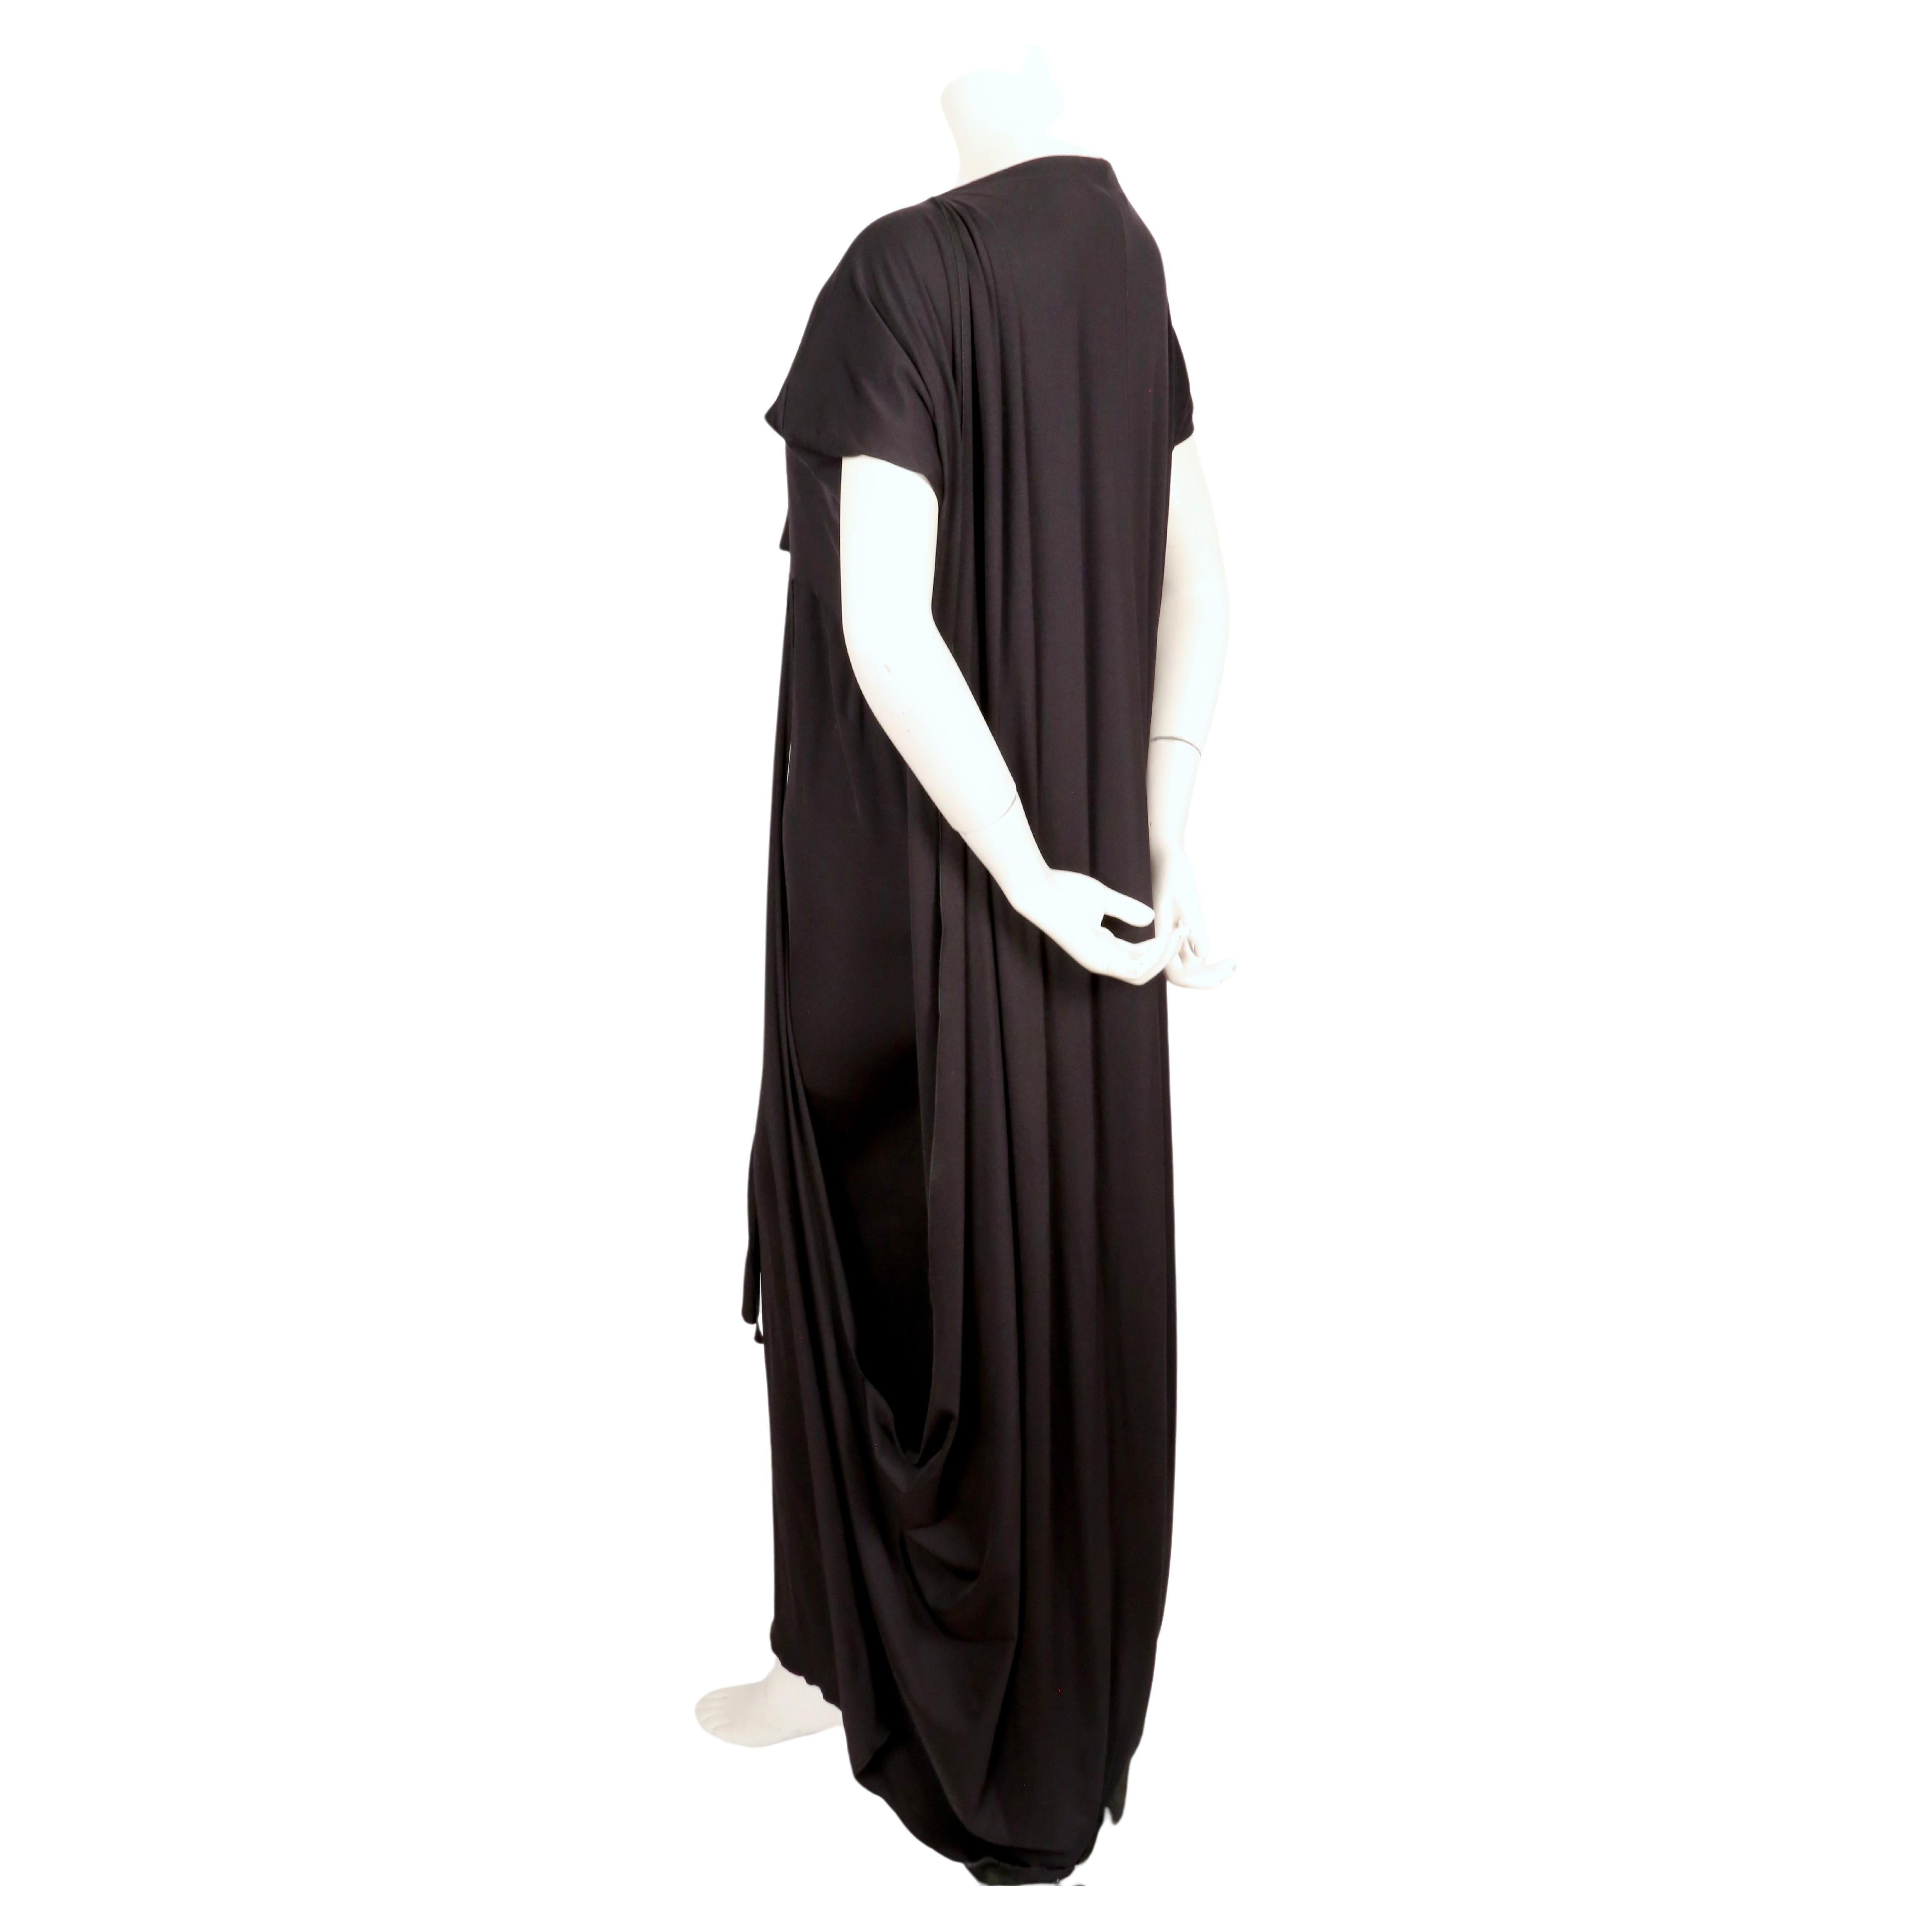 YVES SAINT LAURENT by Stefano Pilati black draped caftan dress In Good Condition For Sale In San Fransisco, CA